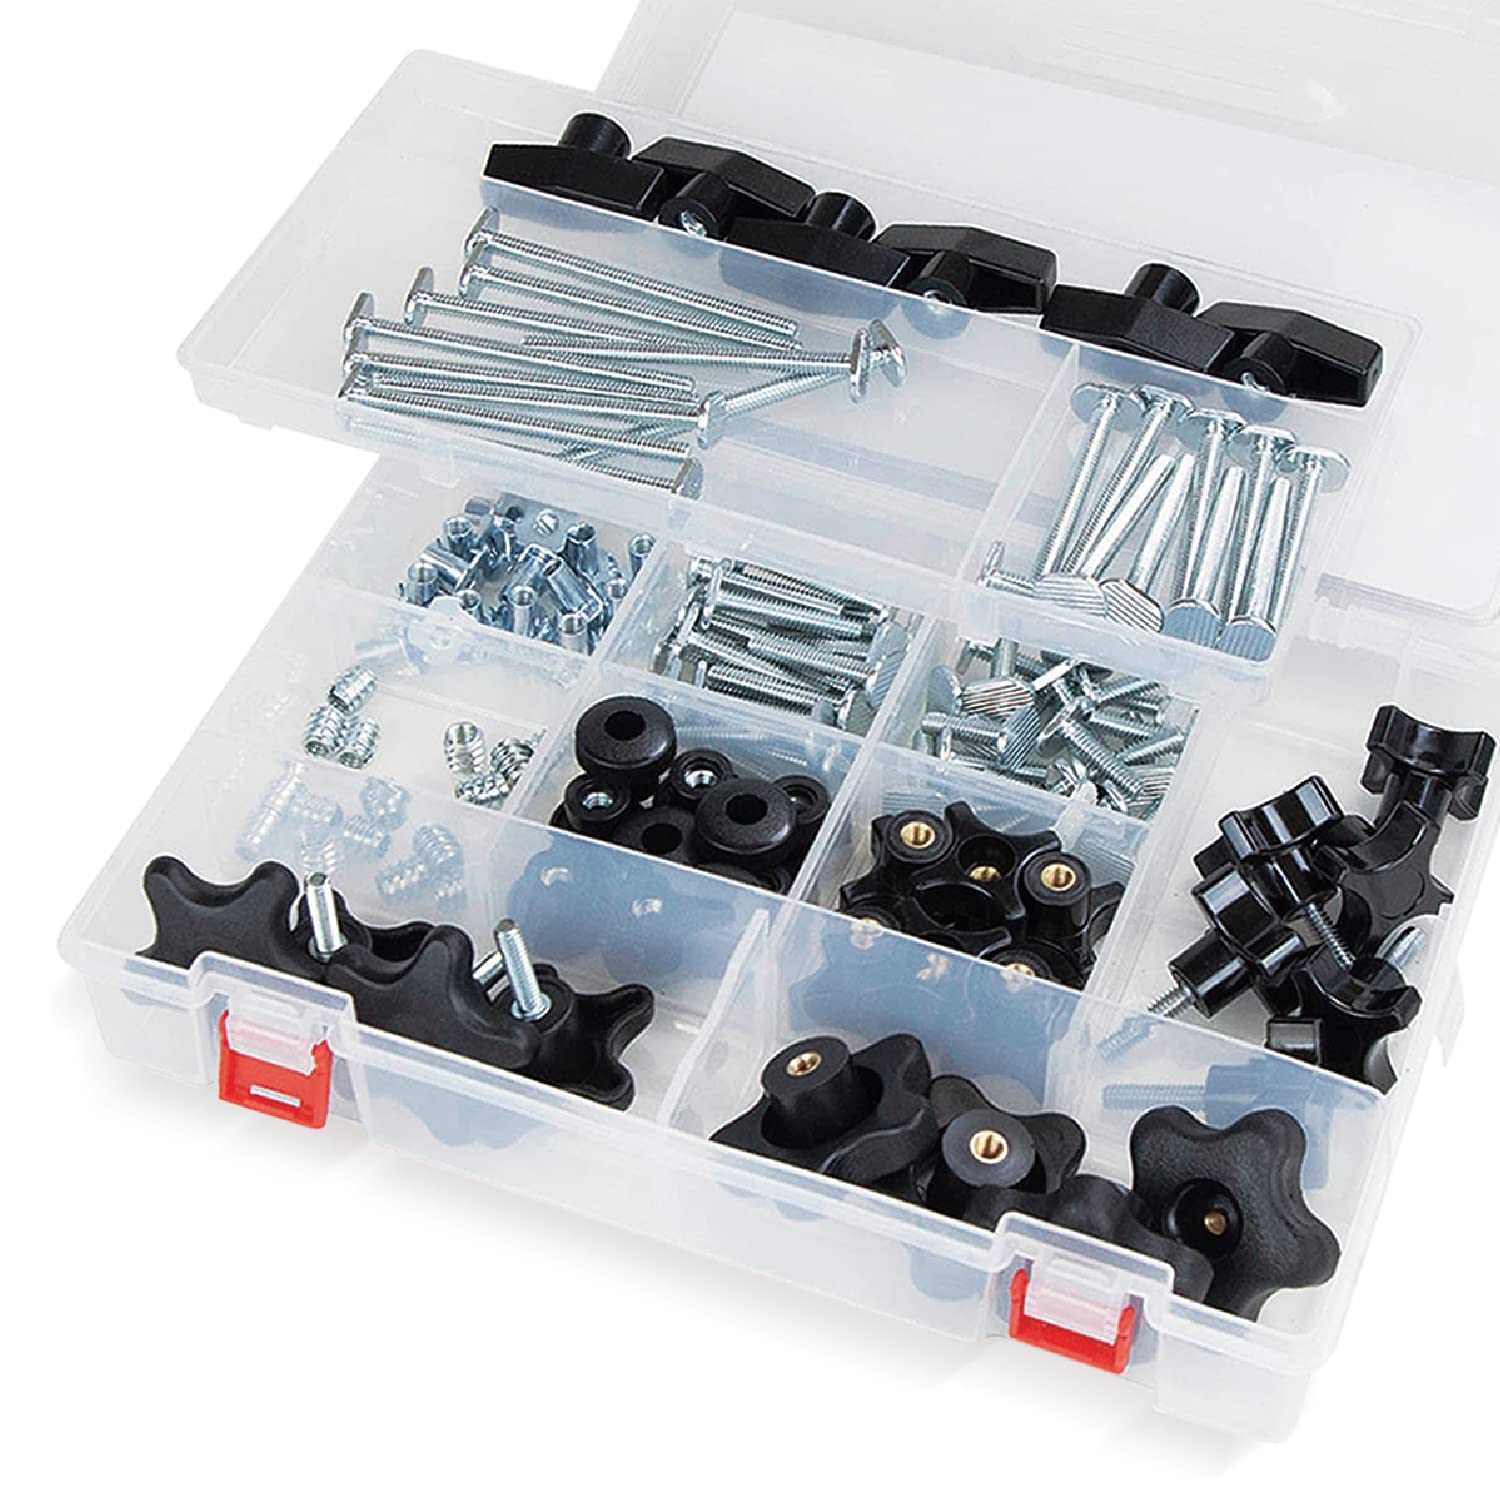 POWERTEC 71128 128 Piece Set T-Track Knob Kit, 5/16"-18 Threaded Bolts and Washers, T Track Bolts, T Track Accessories for Woodw